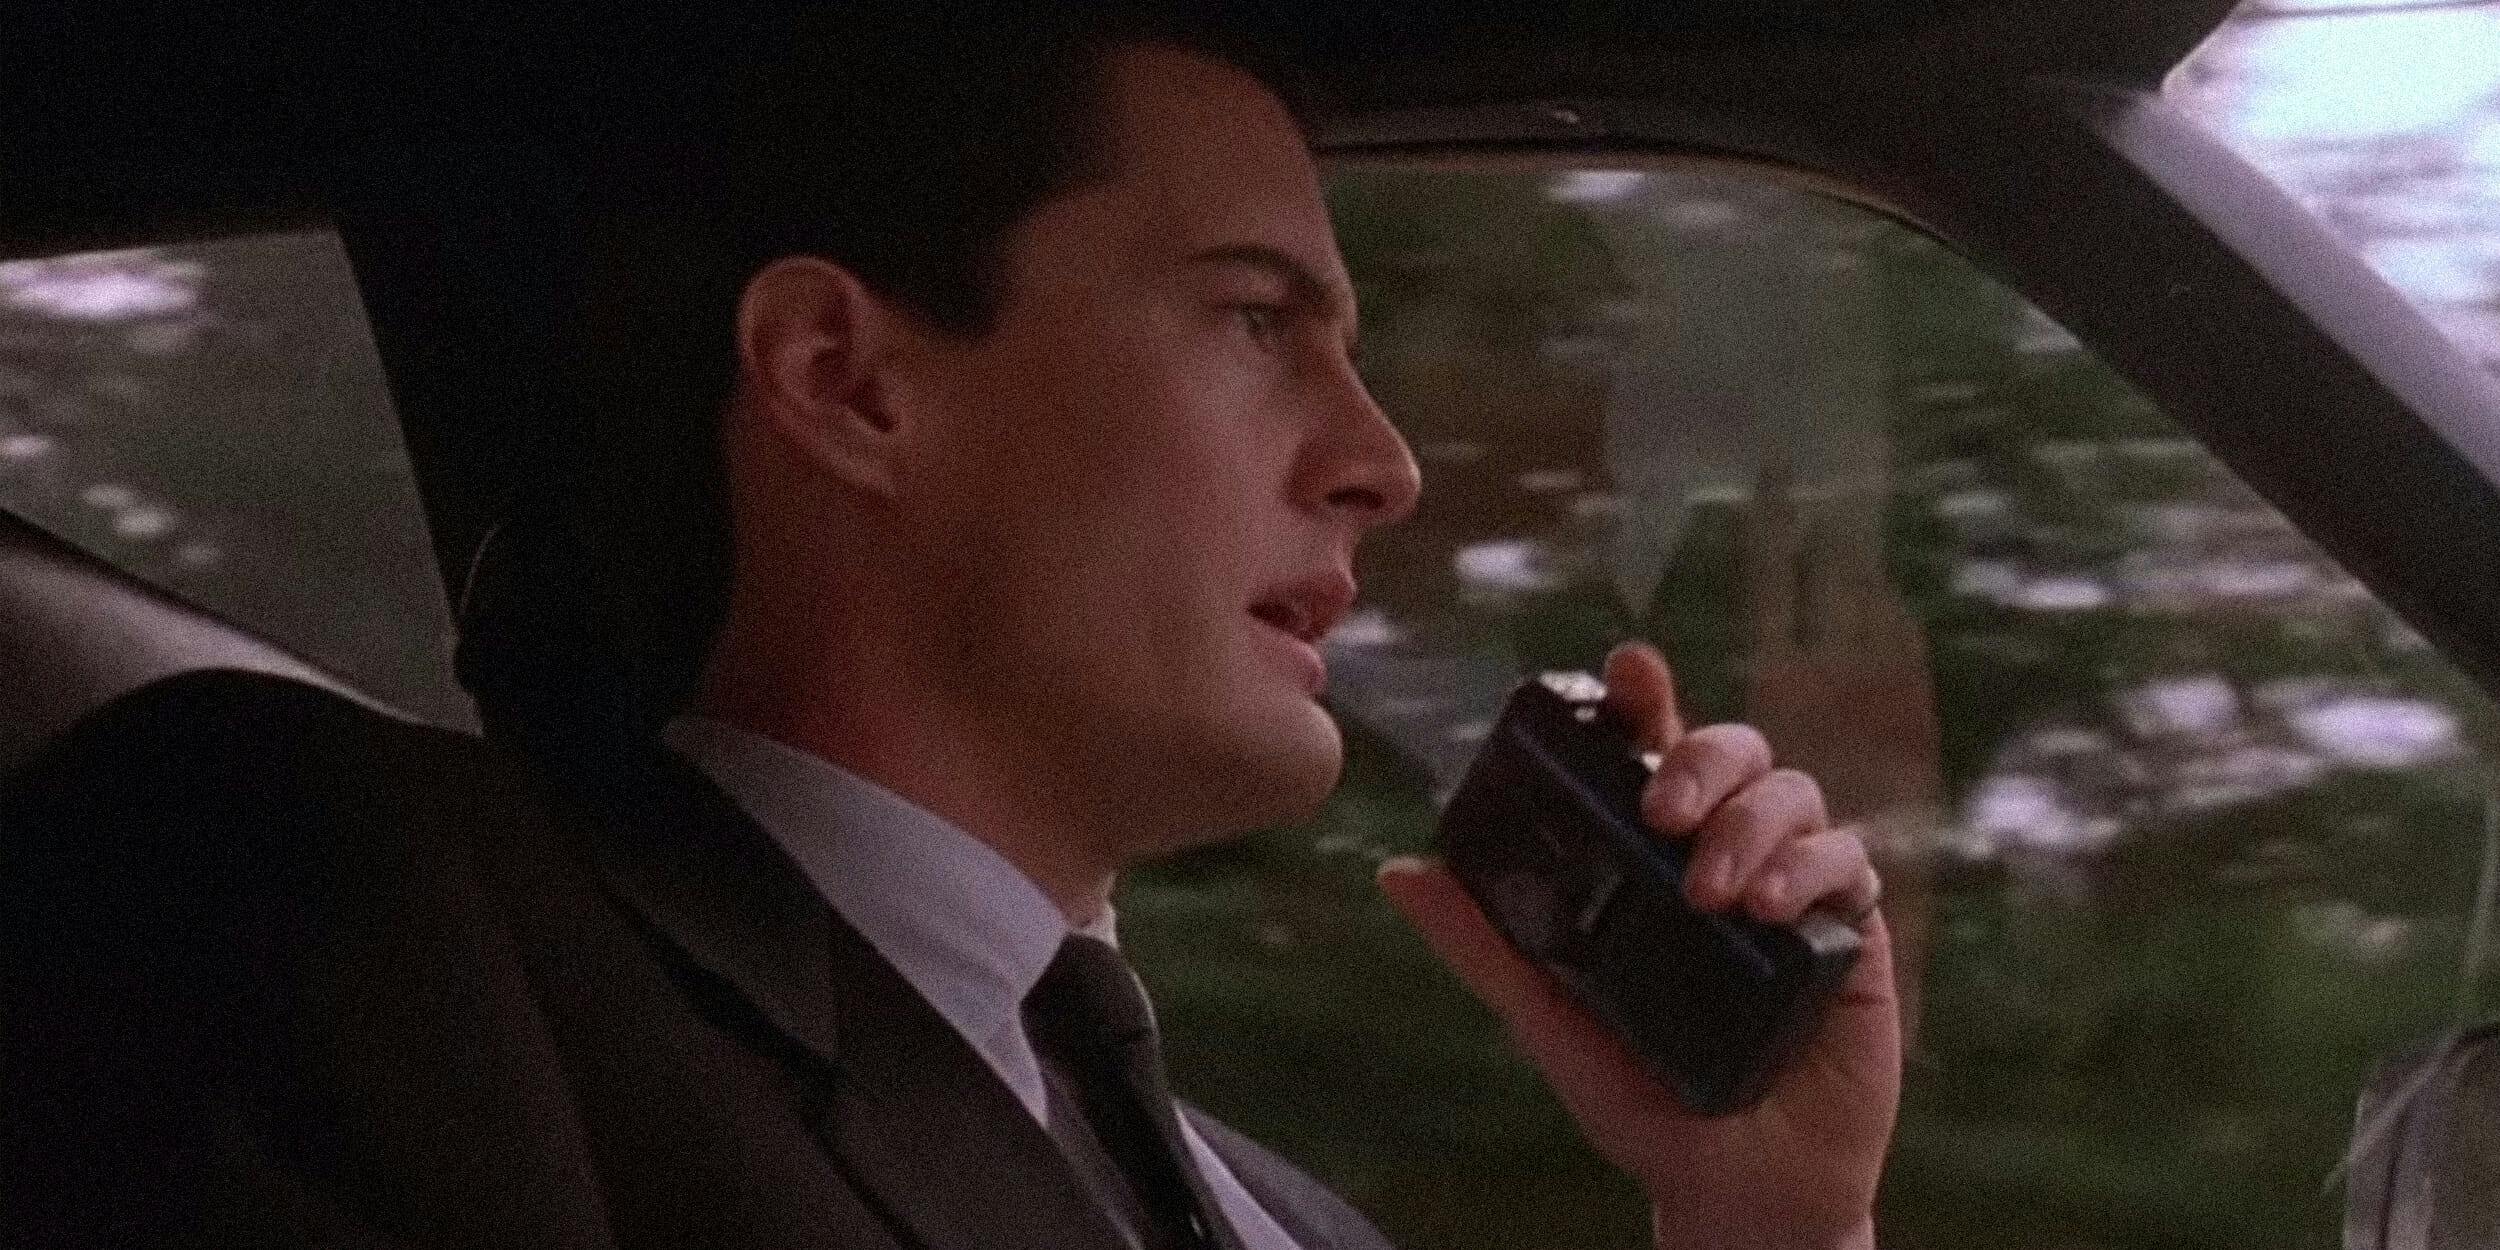 How to watch Twin Peaks online : Detective Cooper dictating to his secretary, Diane